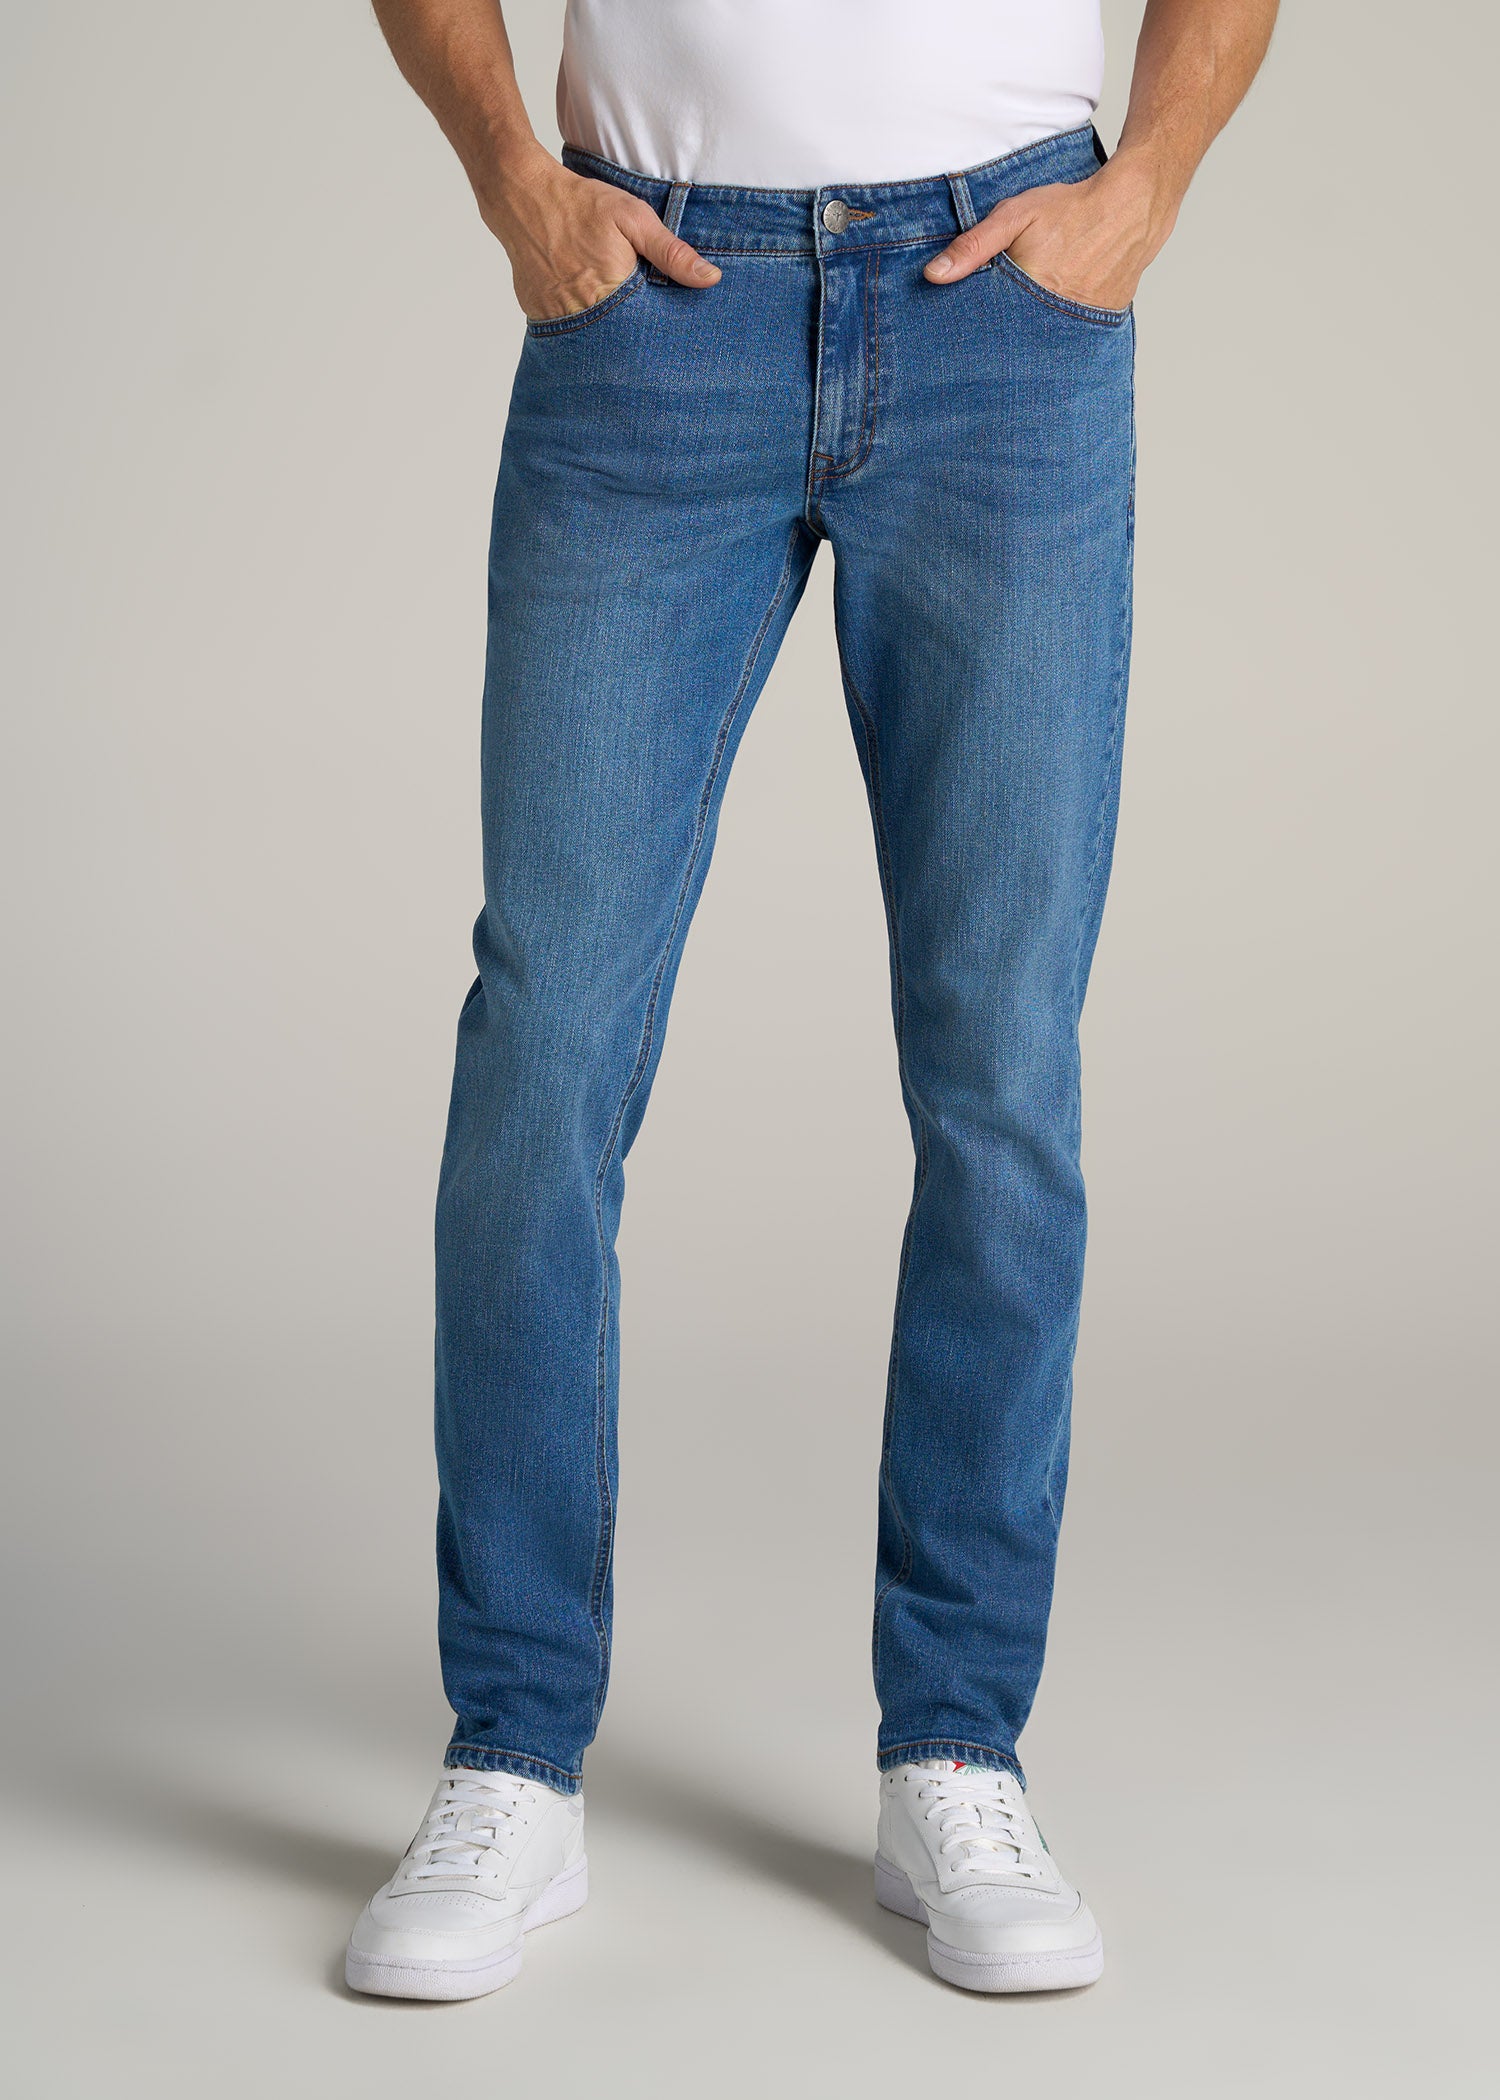 Carman Tapered Jeans For Tall Men Vintage Faded Blue